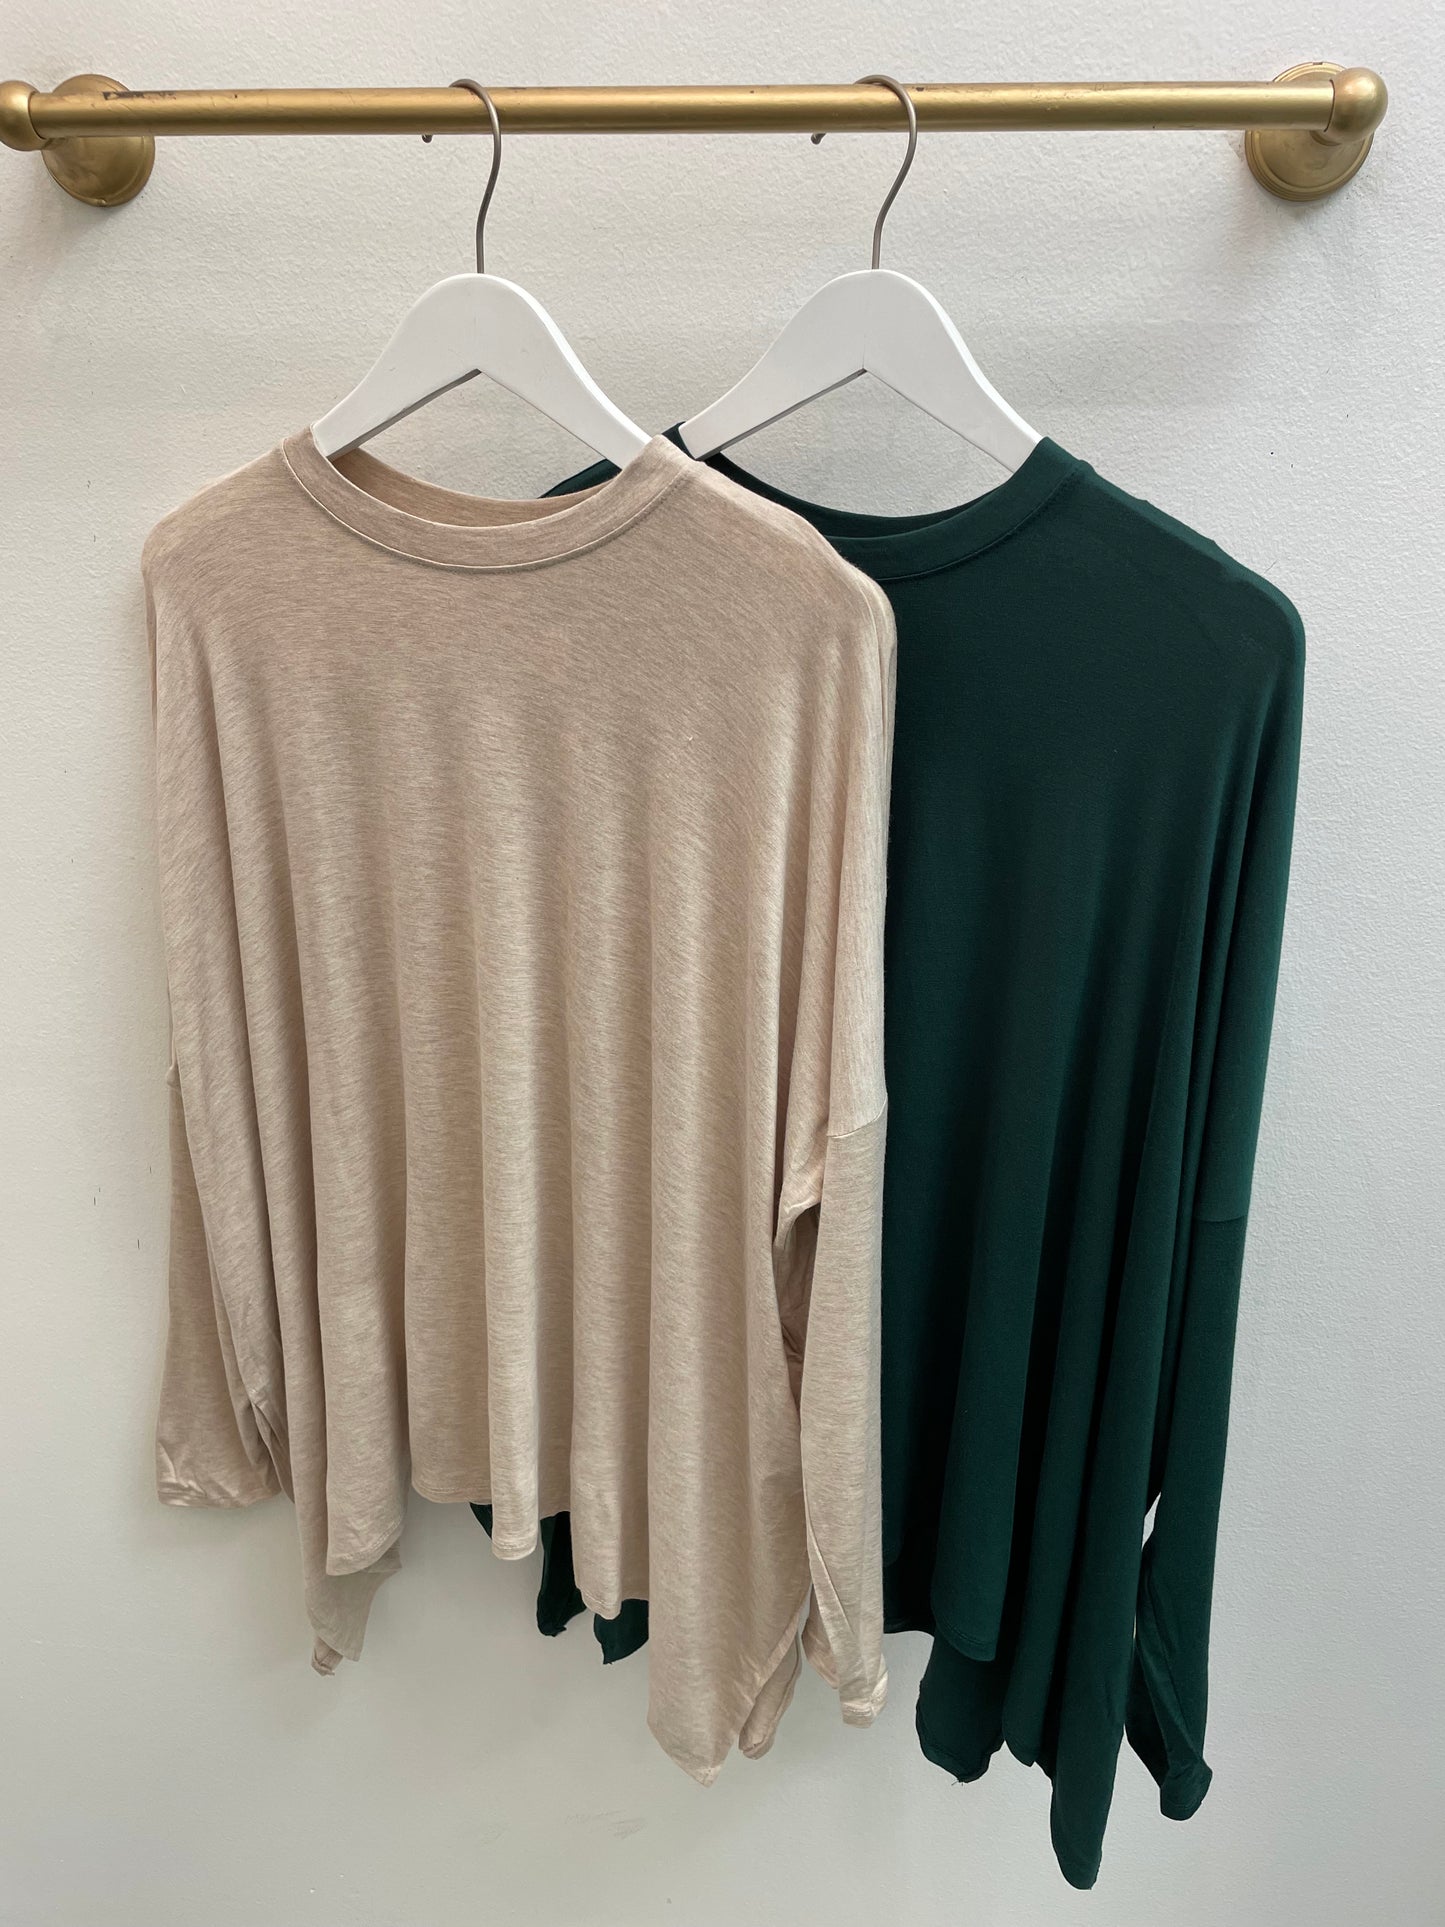 Bring it Home Boxy Knit Top